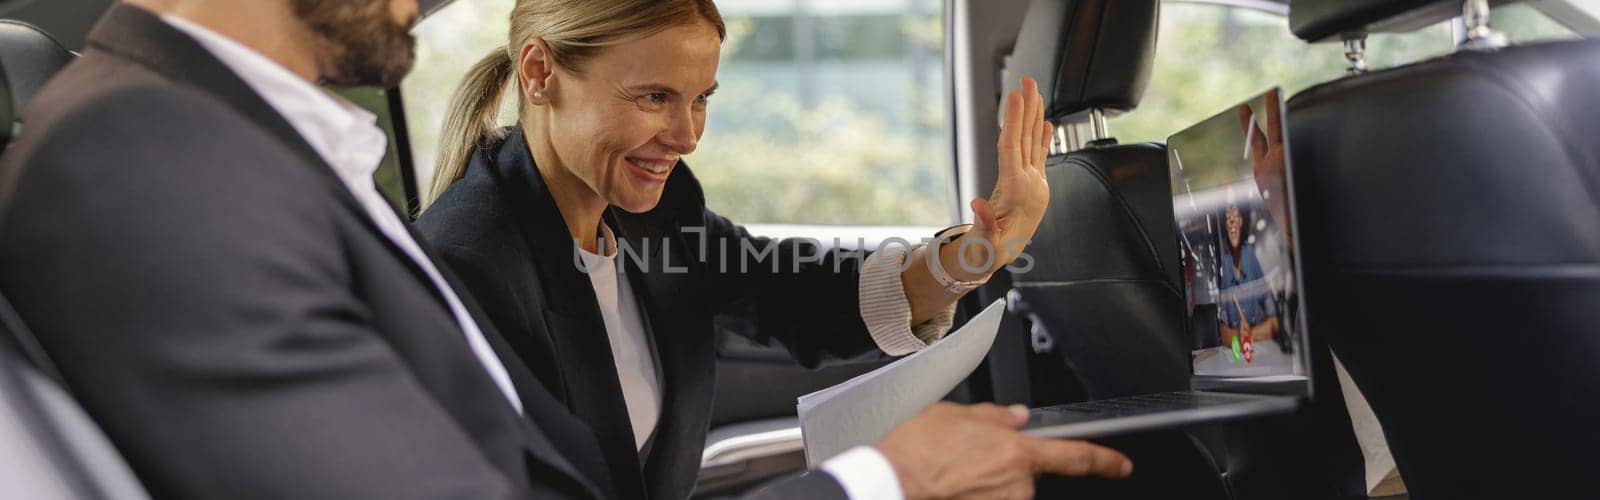 Smiling business colleagues have online meeting using laptop while sitting in car back seats